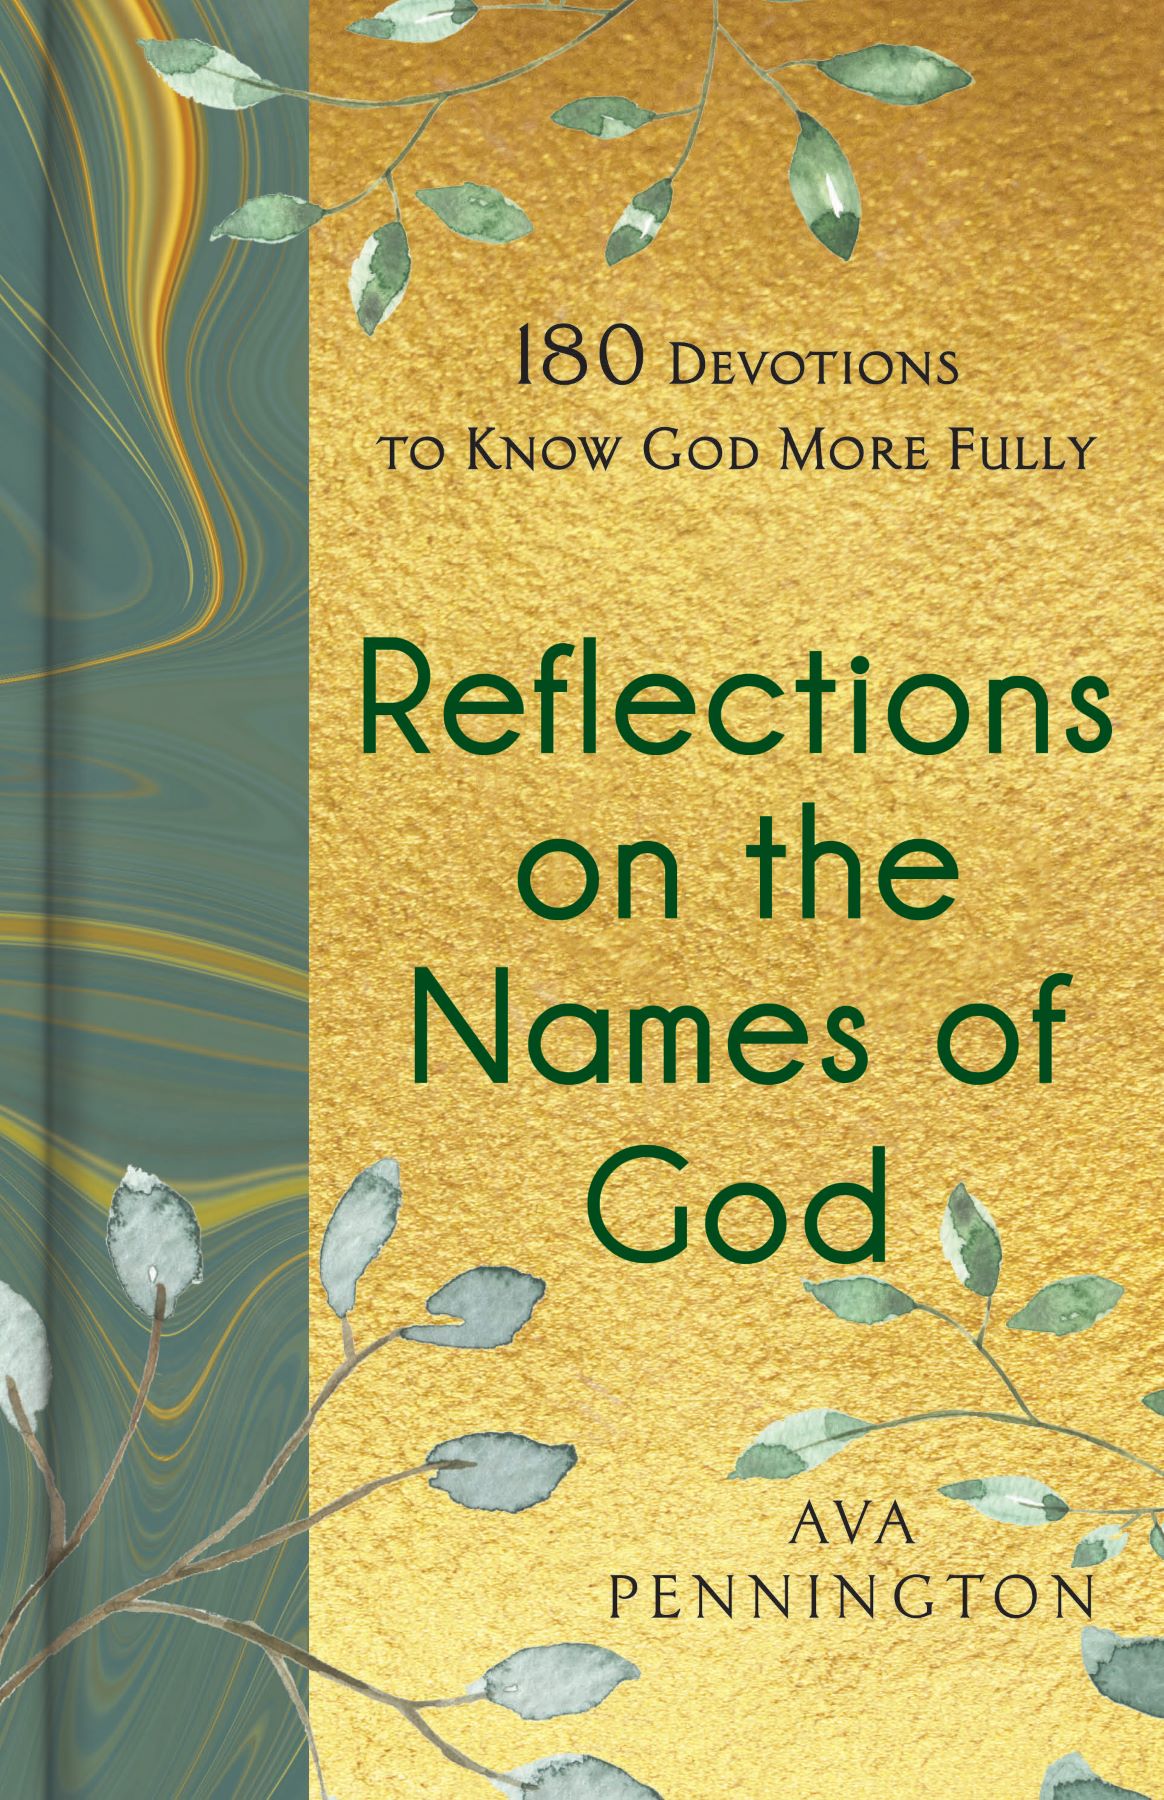 Reflections on the Names of God